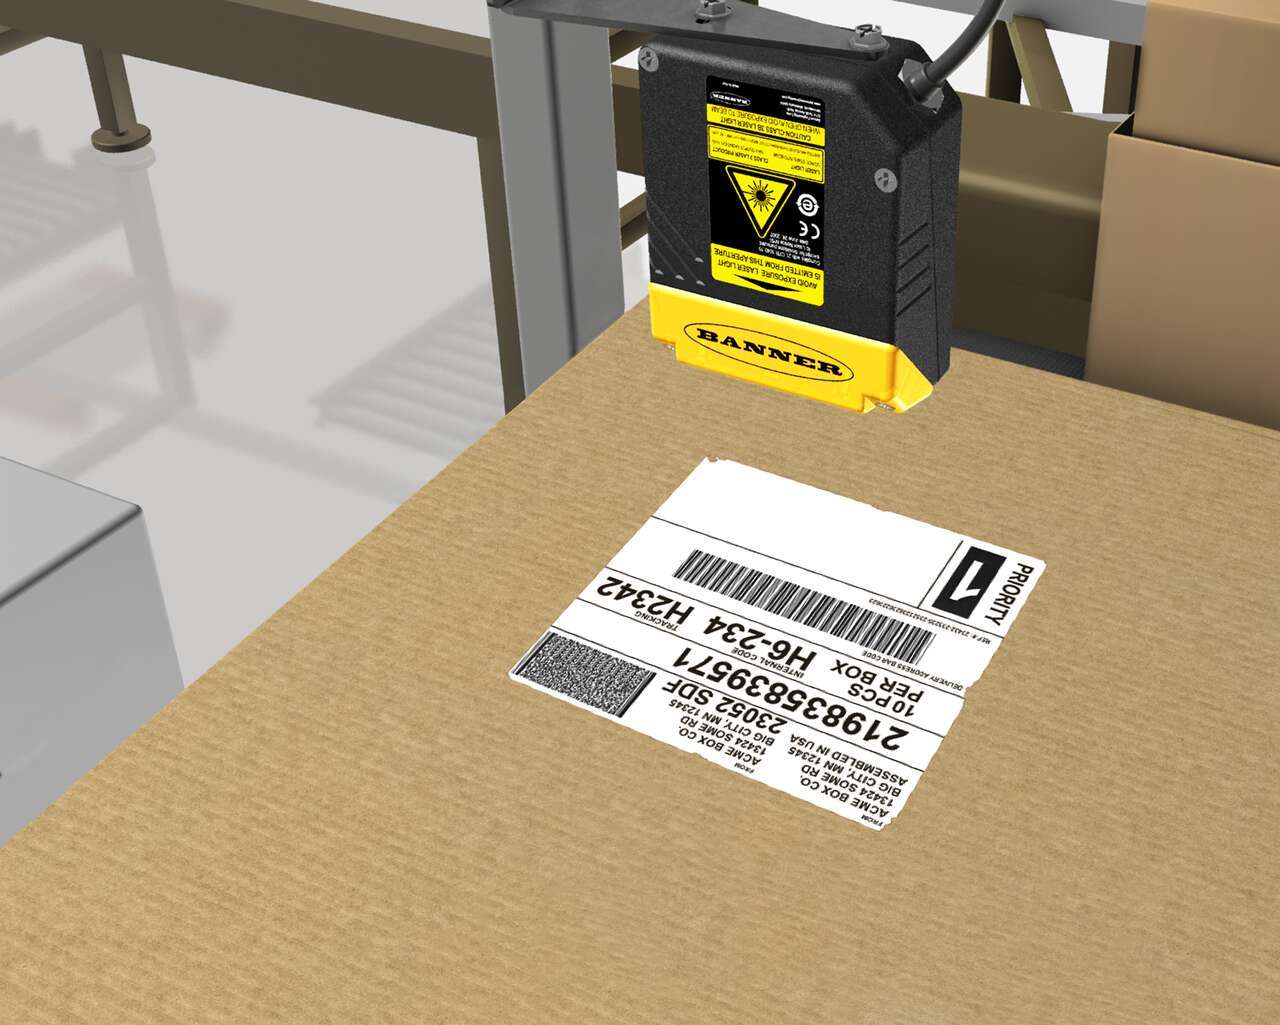 barcode reader scans a code on a box